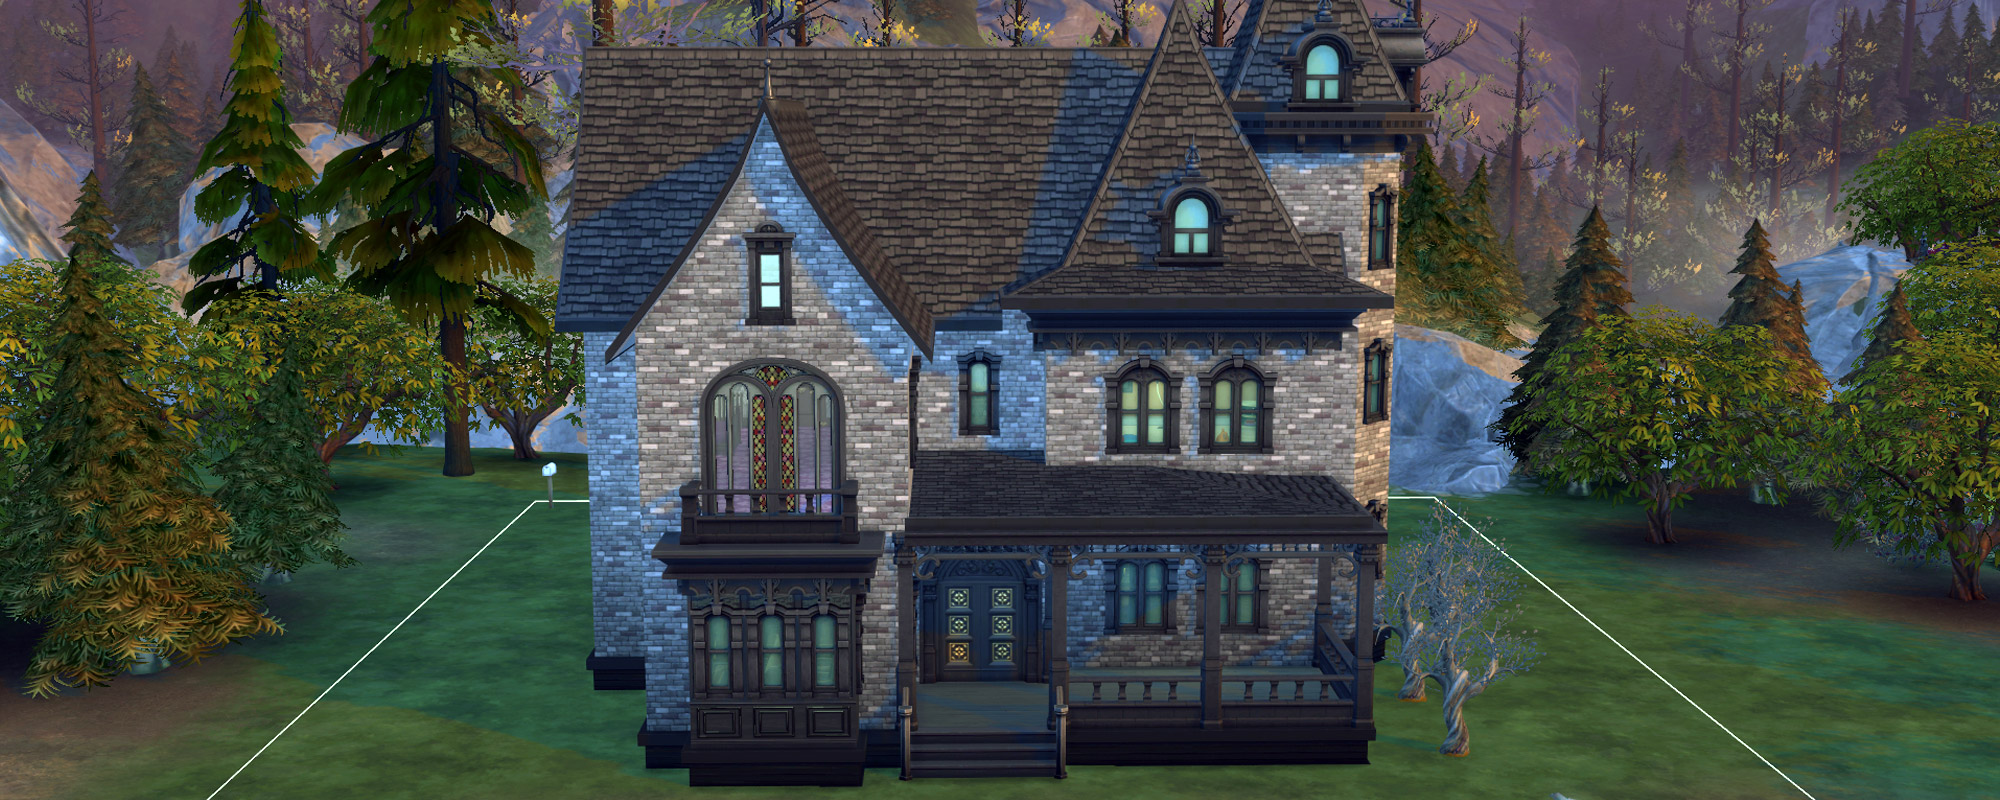 The Sims 4 Vampires Features (Build, Buy mode) - Sims Online - 2000 x 800 jpeg 584kB